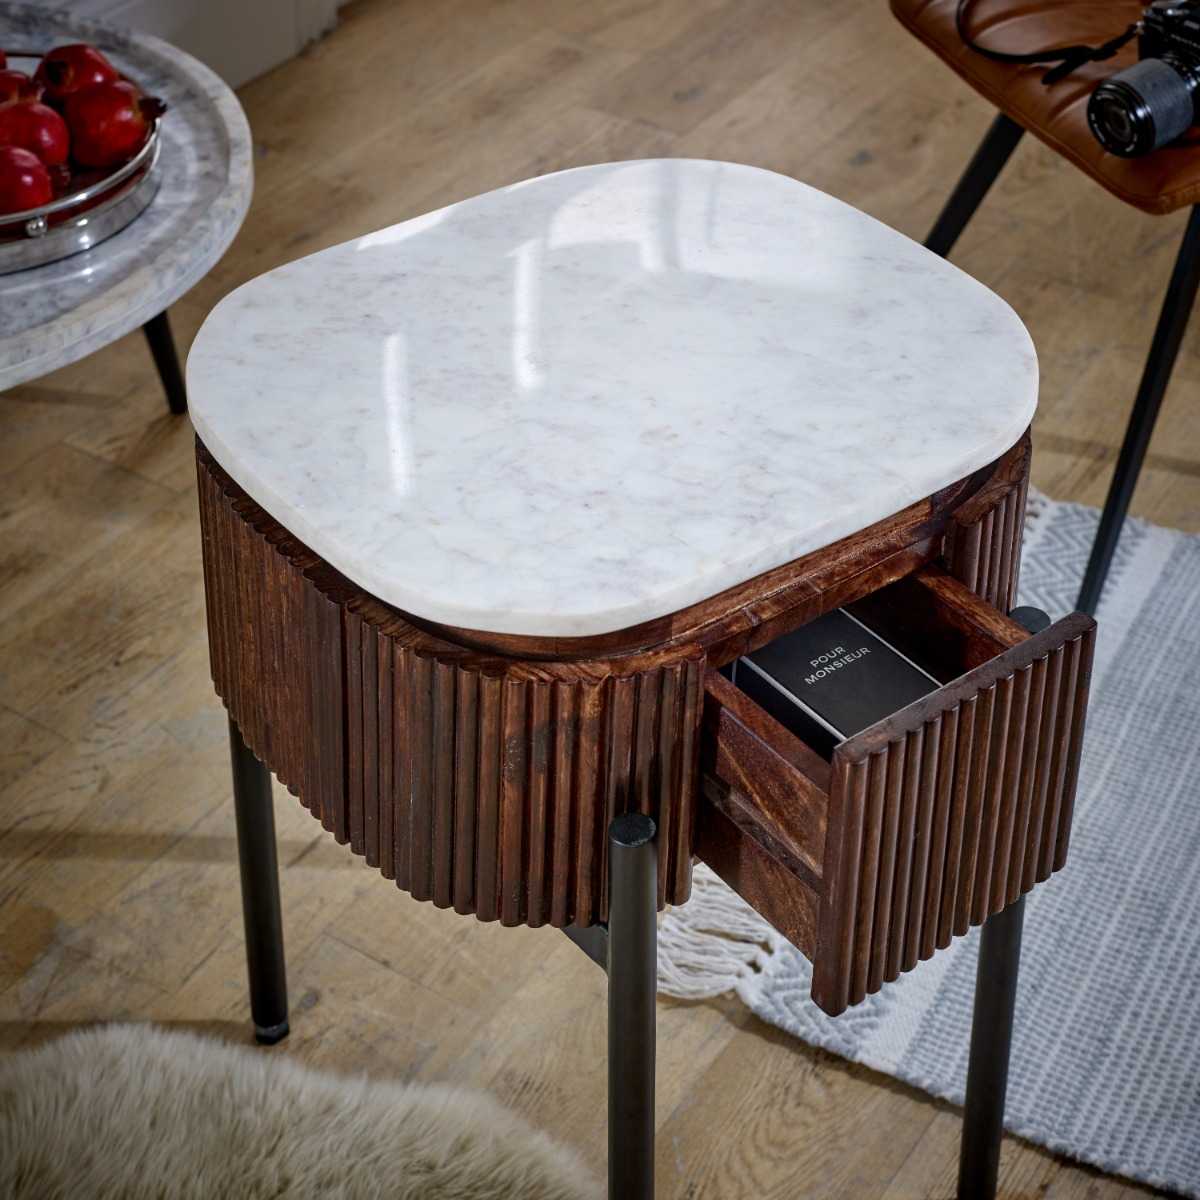 Kelwa handmade solid wood bedside table with white marble top | malletandplane.com